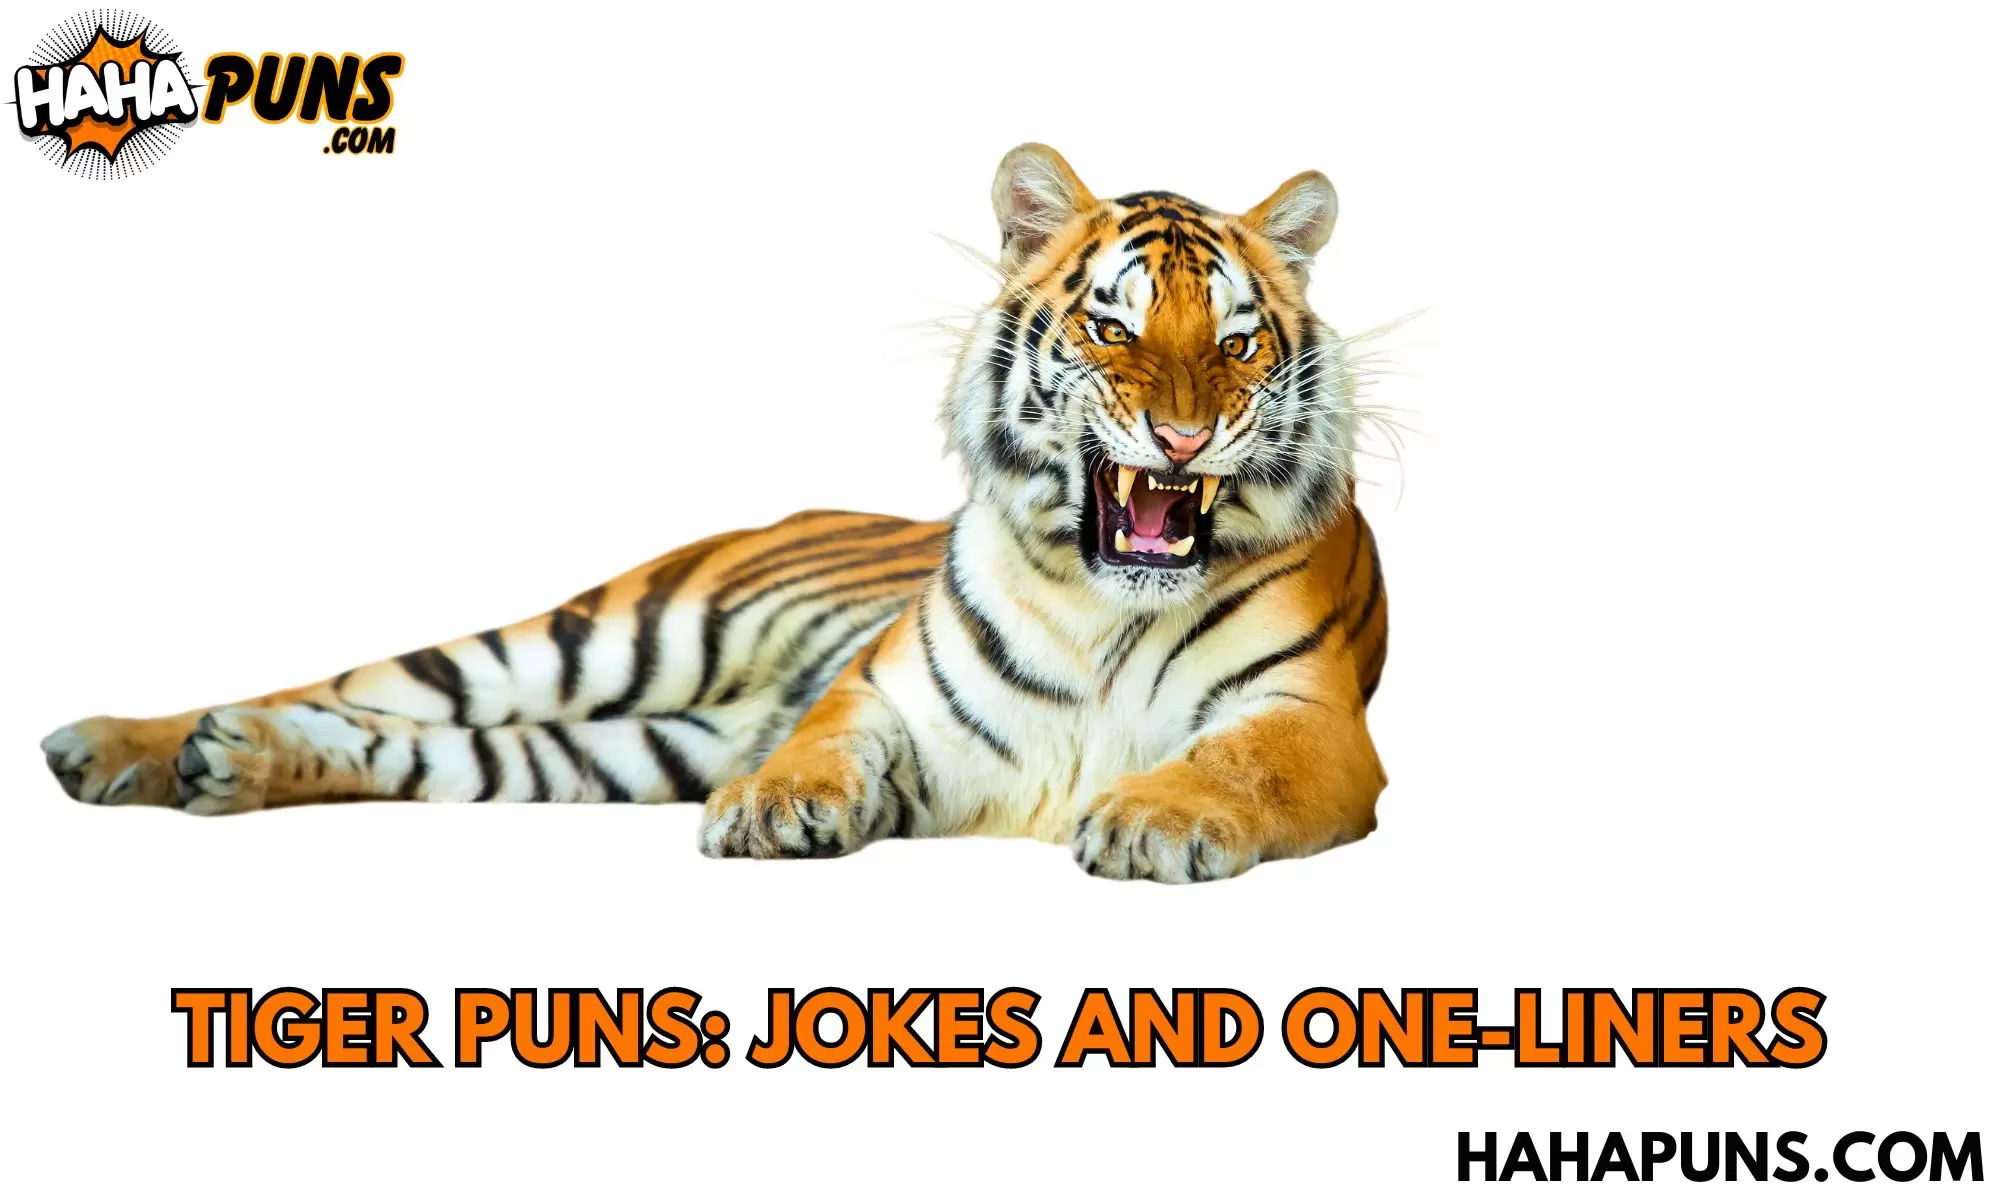 Tiger Puns: Jokes And One-Liners